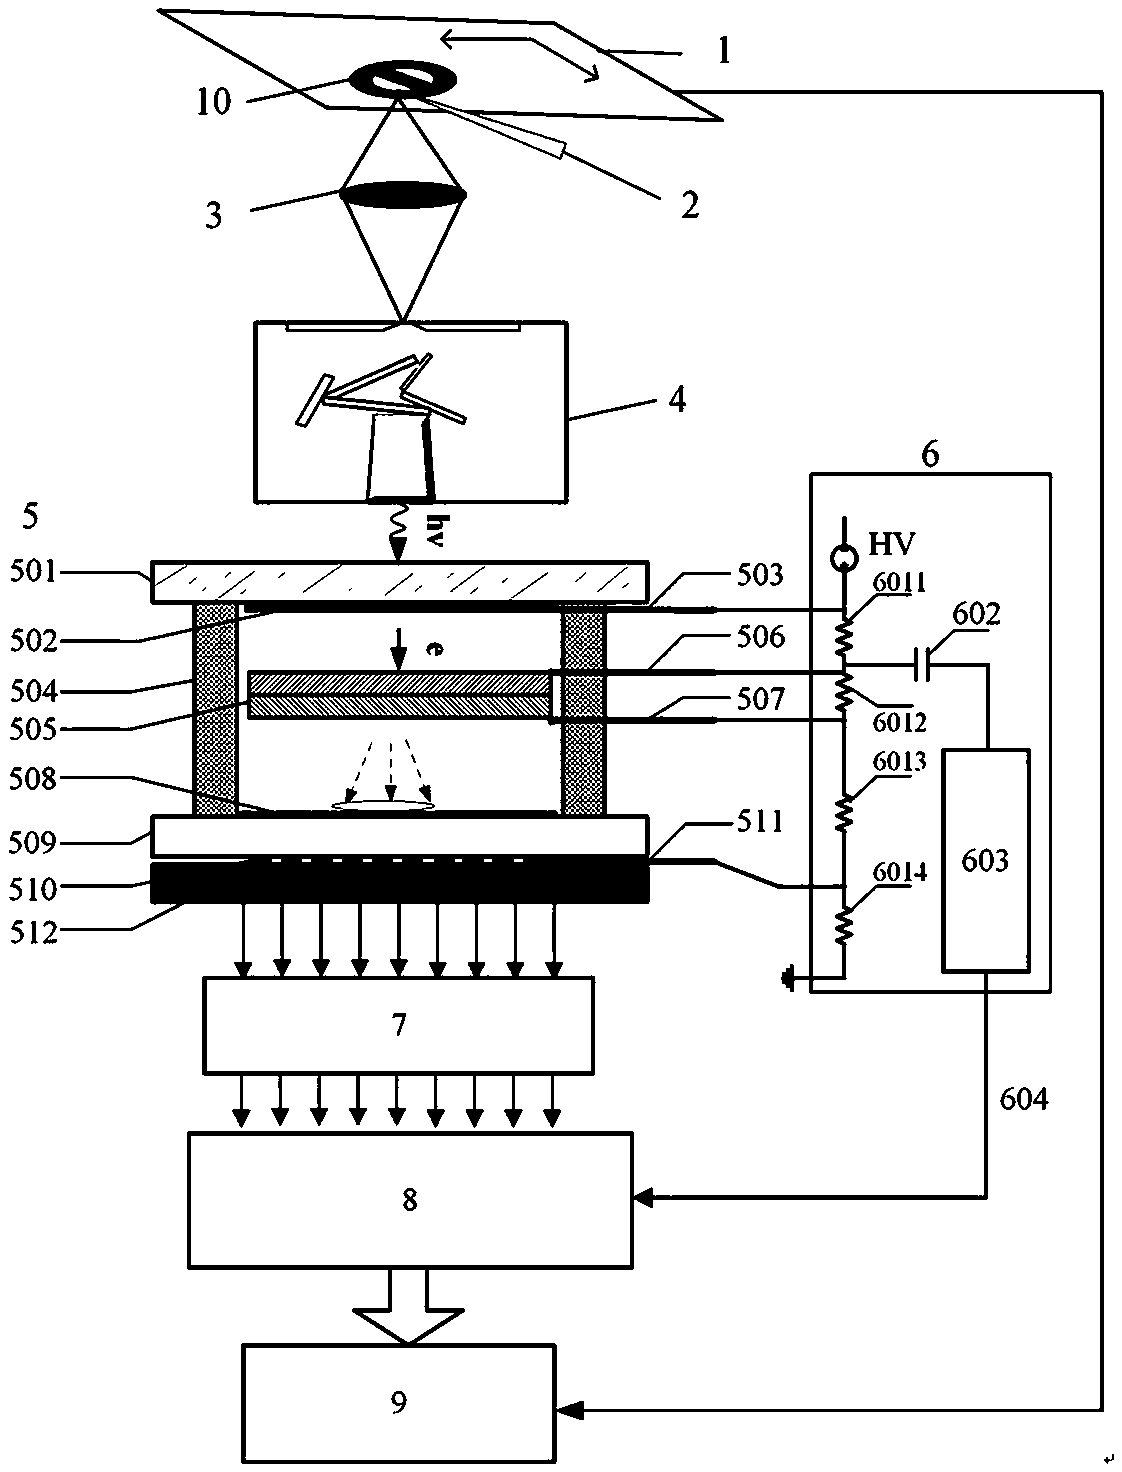 Fluorescence lifetime imaging system and method for synchronous measurement of photon arrival time and position